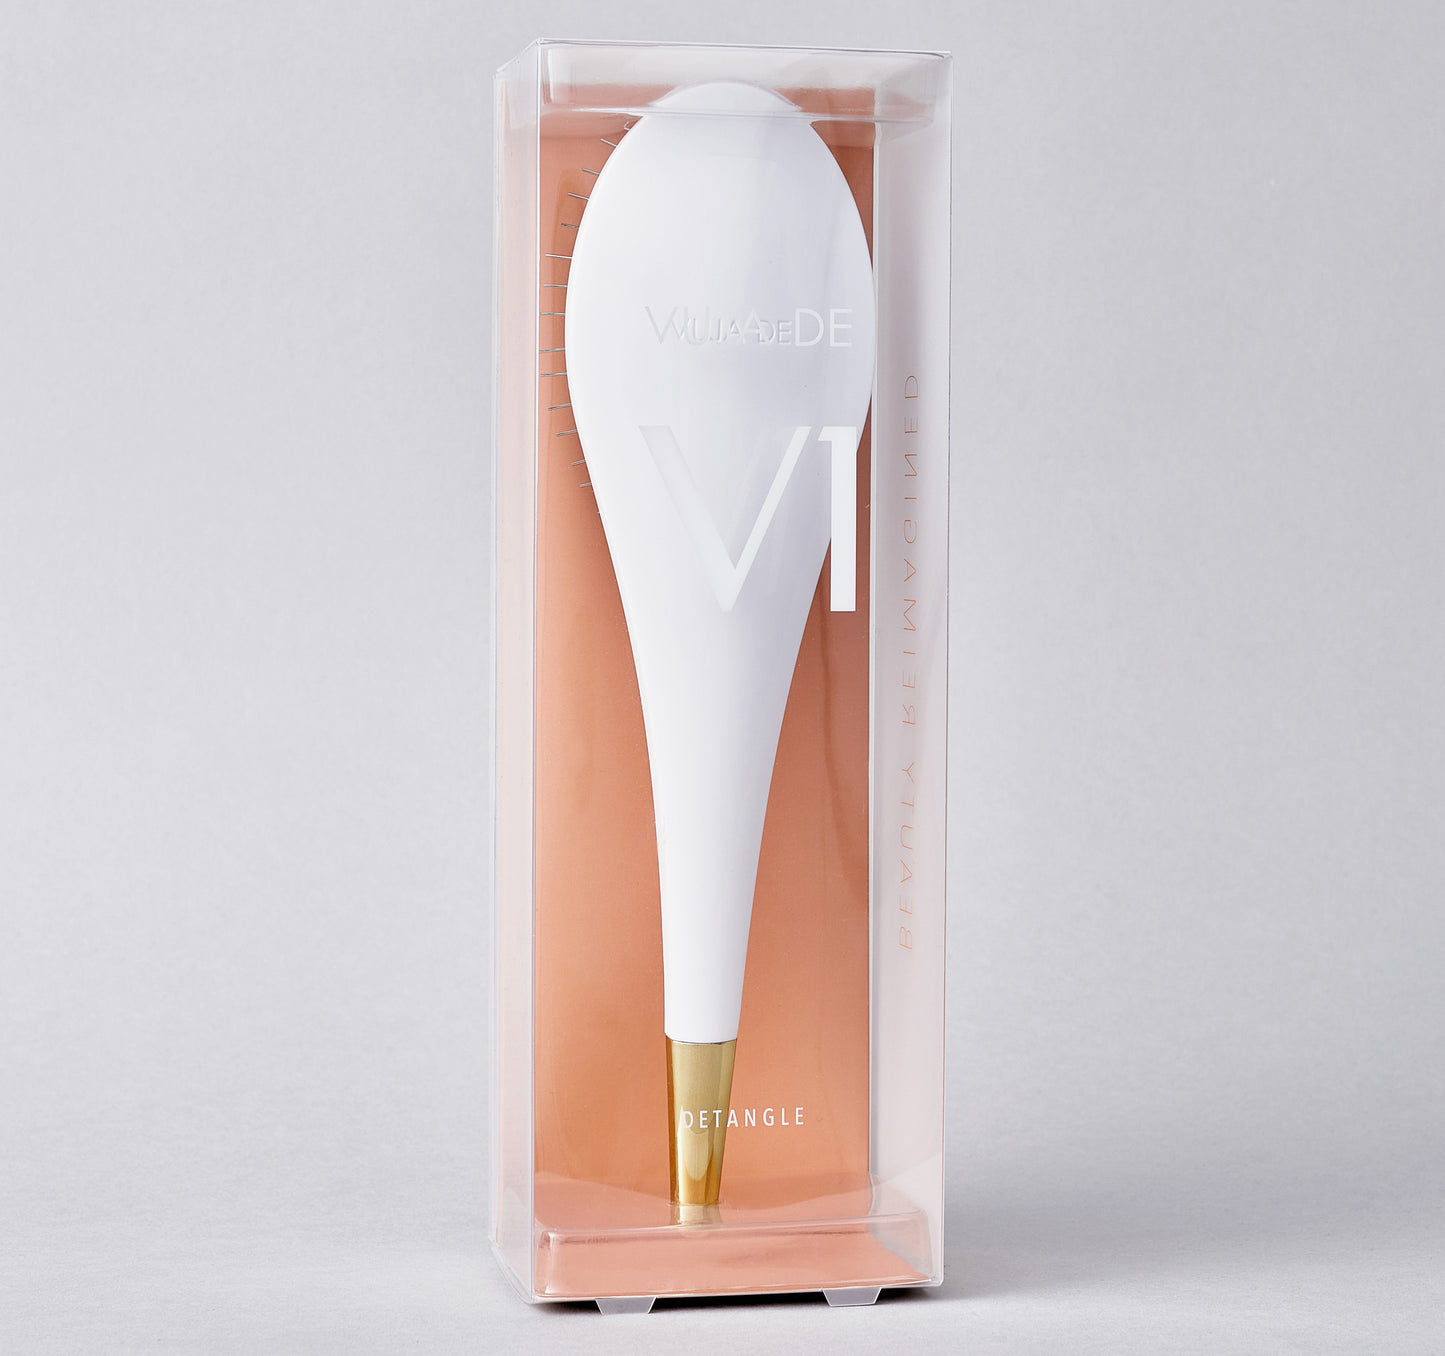 The nub free, ultra-smooth, stainless-steel bristles of this detangling brush are ideal for all hair types, wet and dry. They are delicate enough for fine, fragile, or color treated hair, strong enough for coarse, thick, or curly hair, as they gently stimulate the scalp to promote circulation and hair growth.